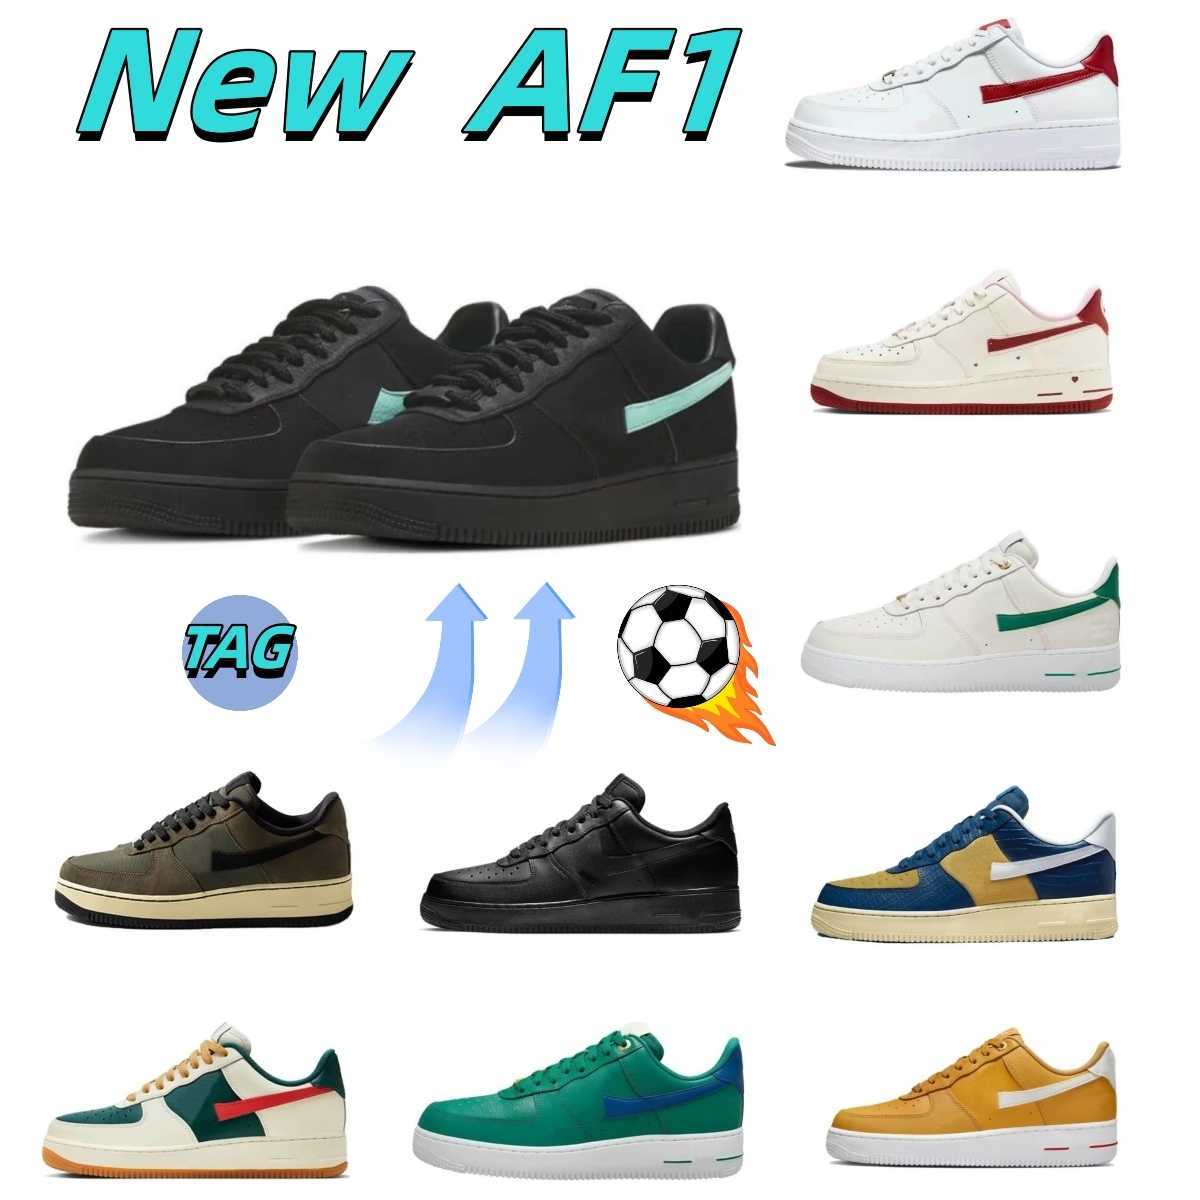 

2023 Olive 5.0 Top trainer 1S Sky New Designer Running Outdoor og tn white black low Basketball Shoes Sneaker Men Women sports originality casual retro classic 36-45